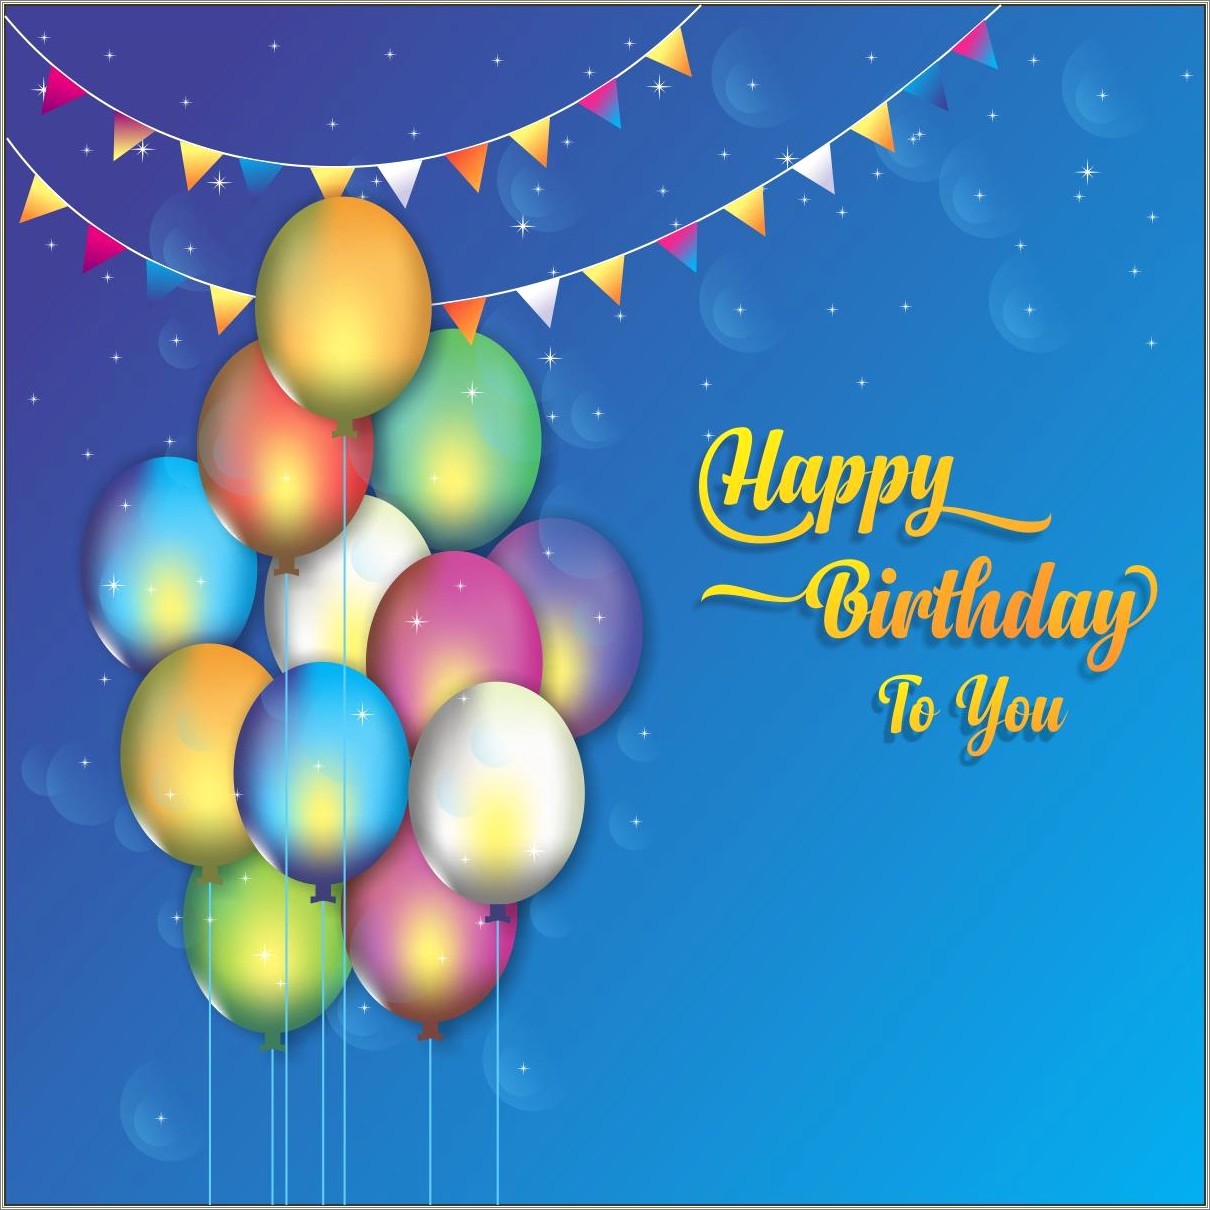 Birthday Banner Design Photoshop Template For Free